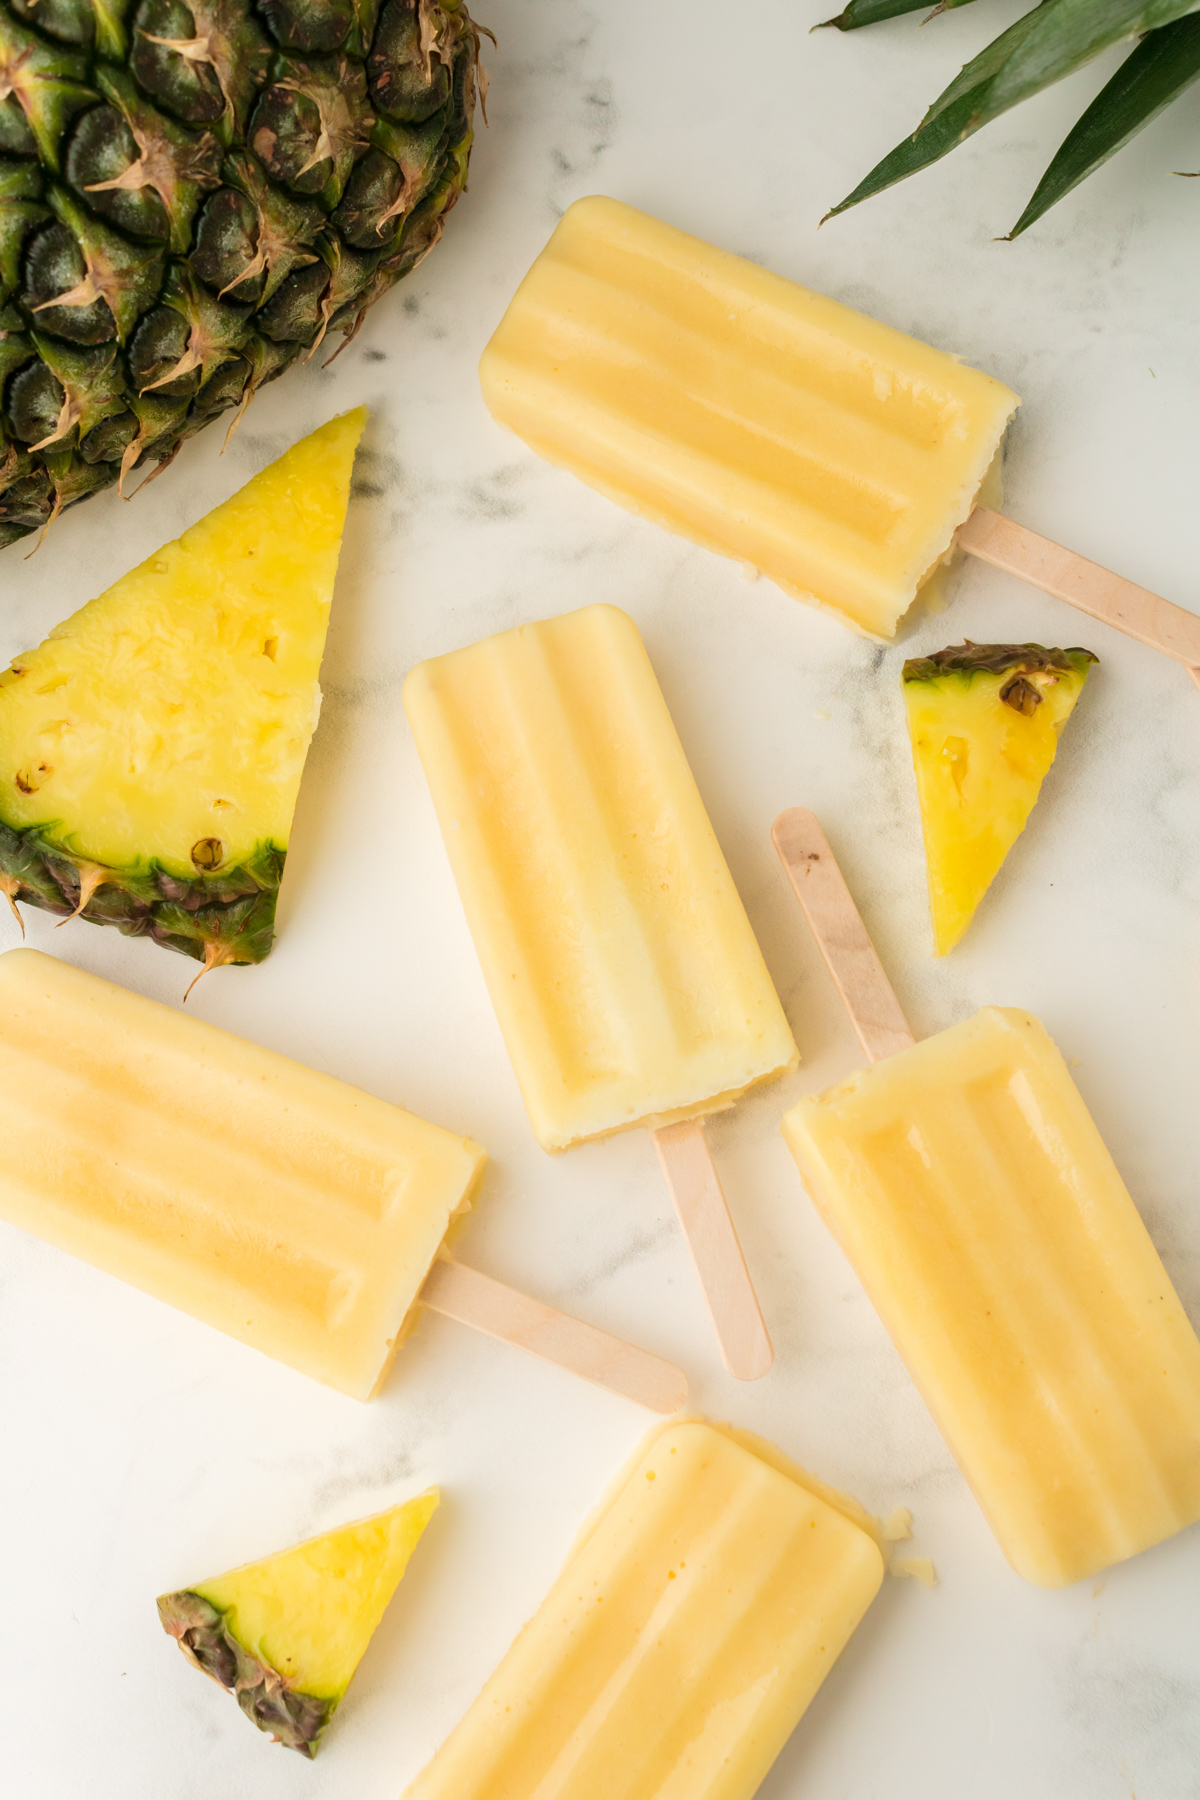 ice cream dole whip popsicles laid on a countertop with pineapple slices